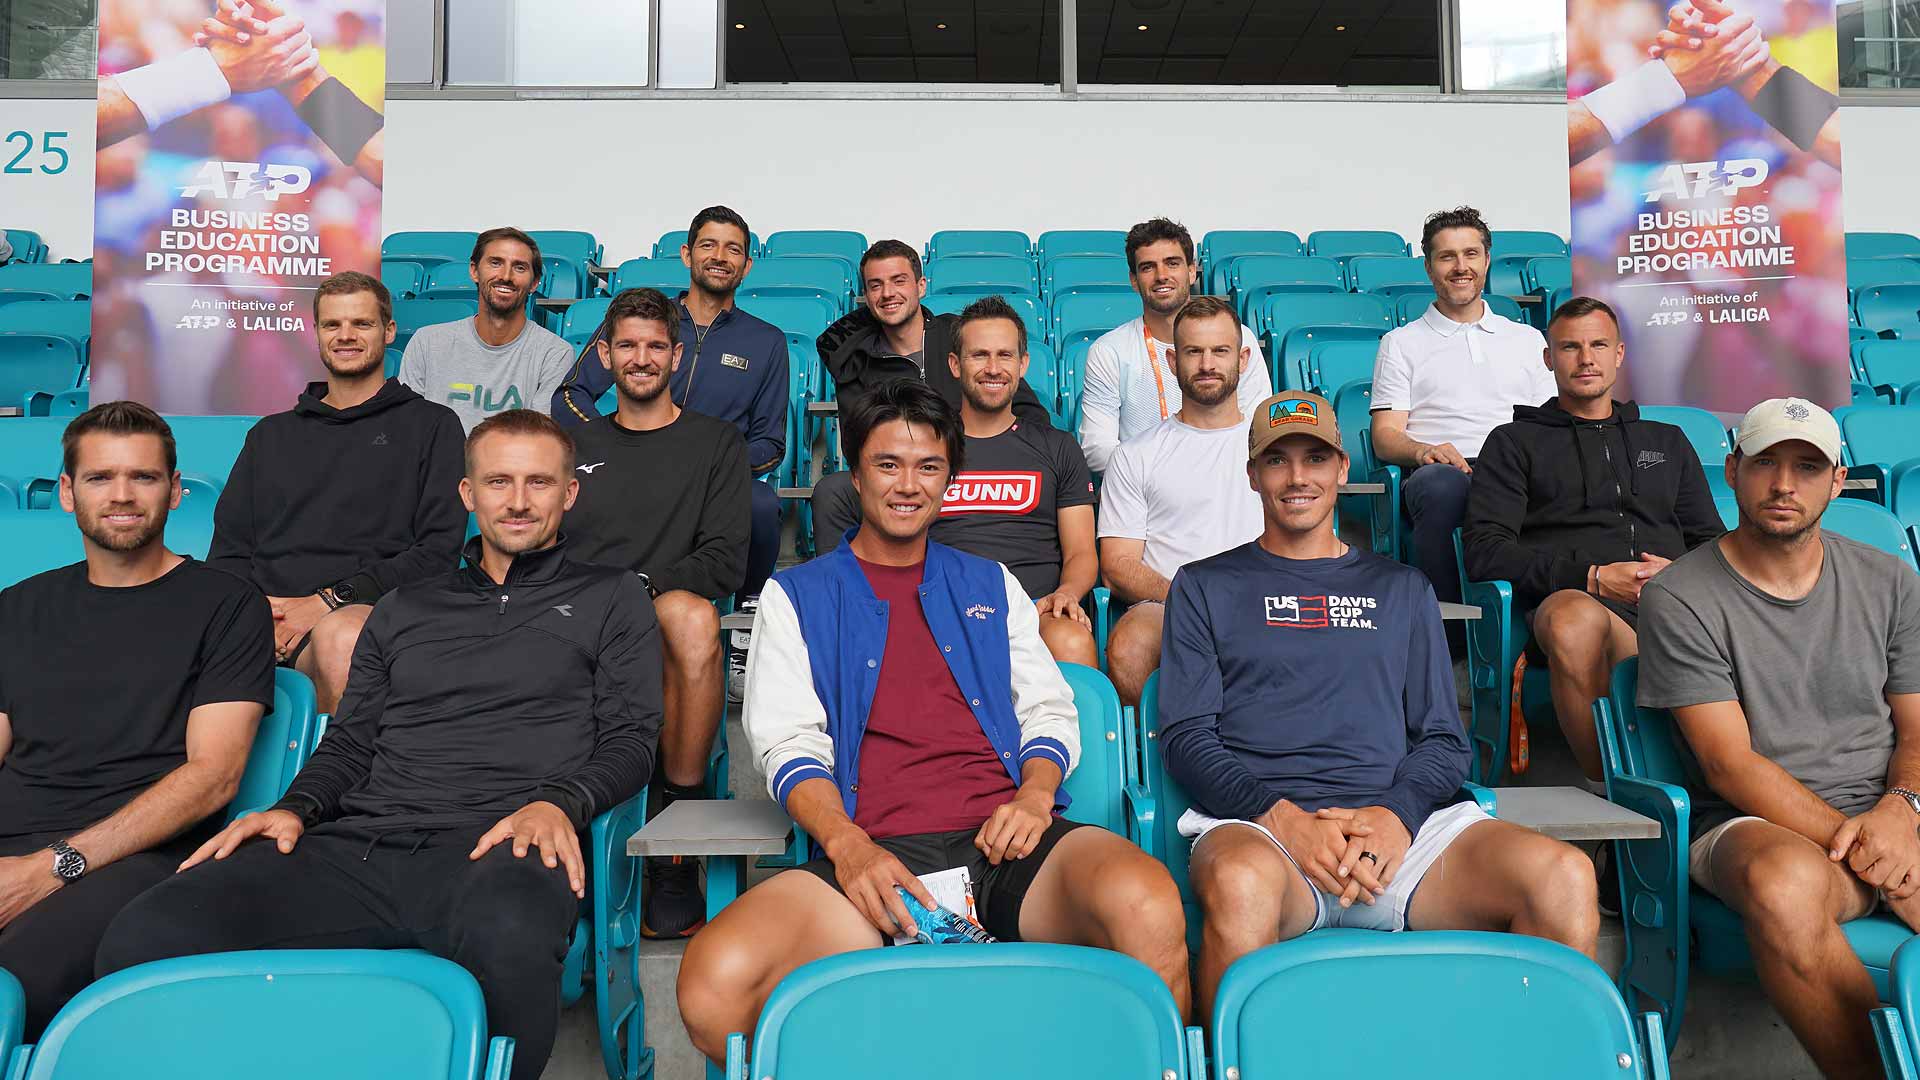 Second year of 'fantastic initiative' ATP Business Education Programme underway